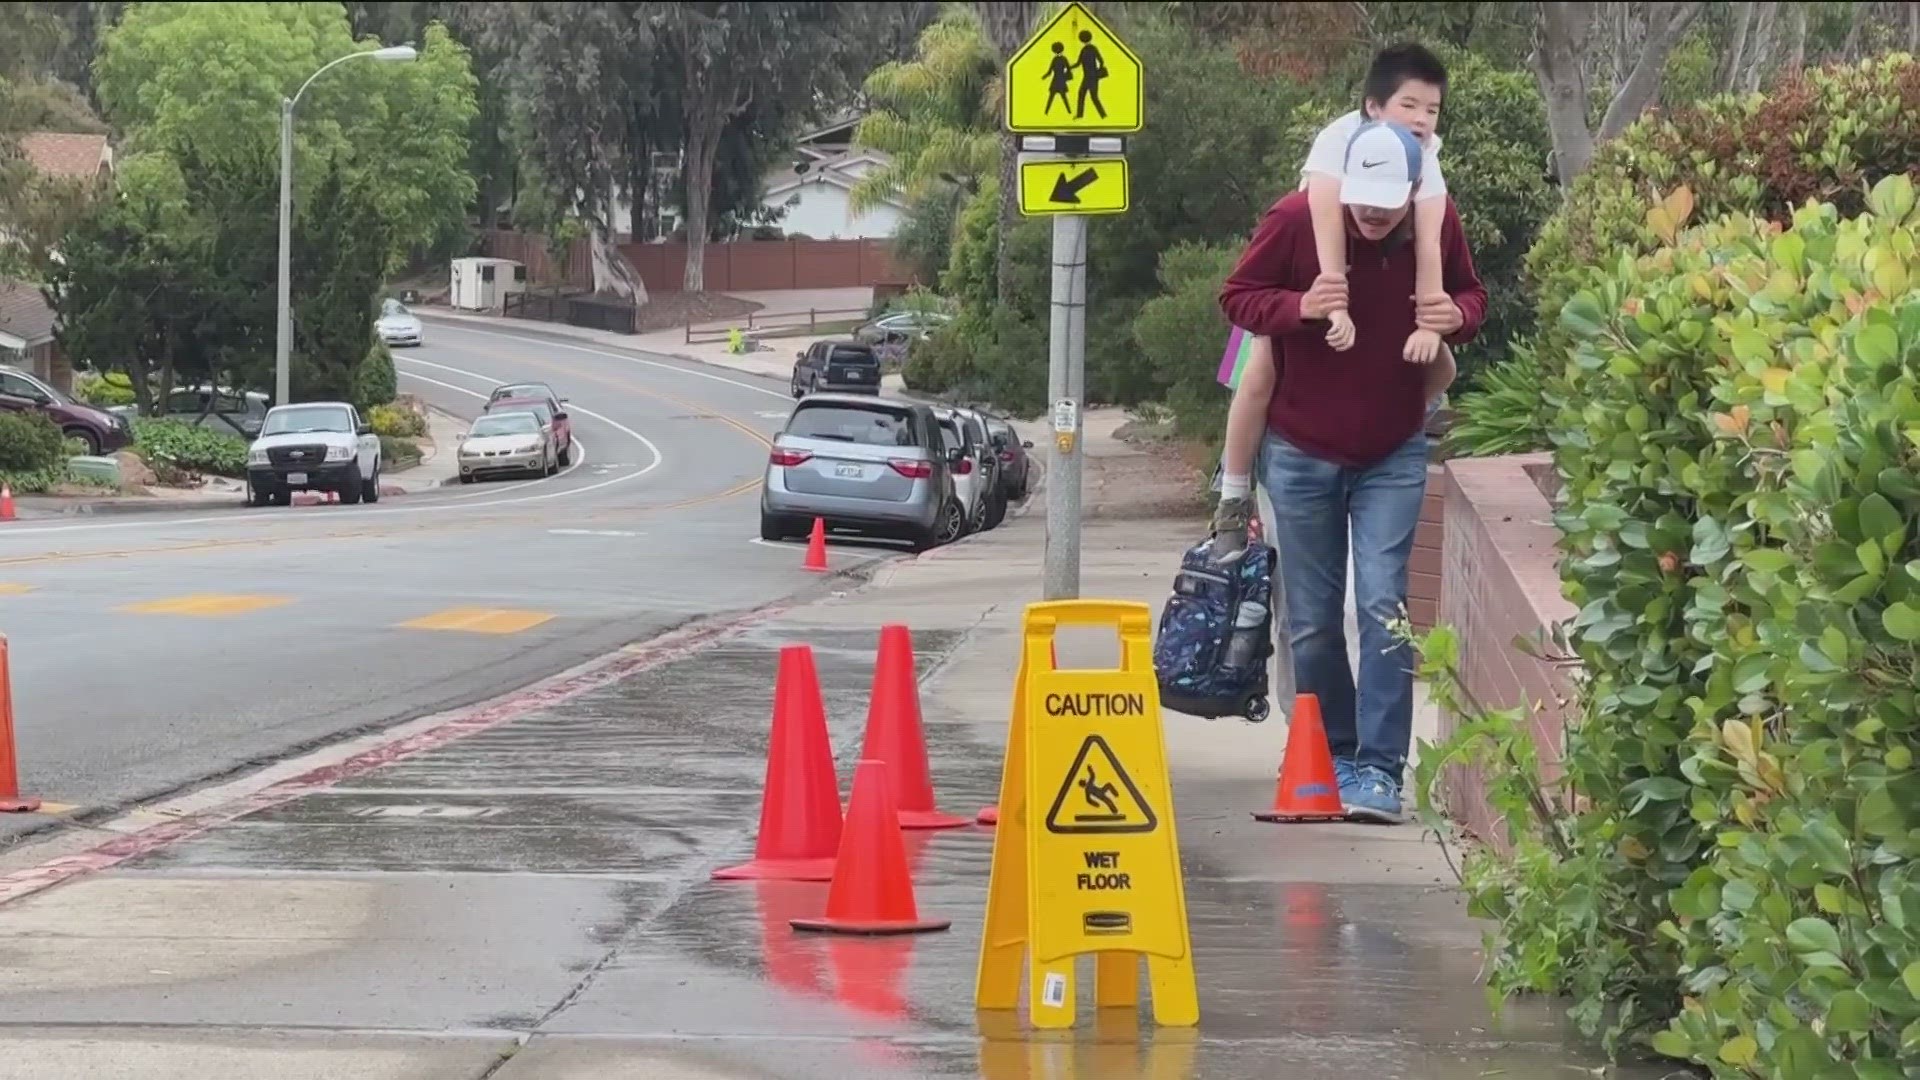 "The kids have to step over it. They can slip and fall. It’s a lot of water when we are trying to cut back," said a viewer who reached out to CBS 8 for help.